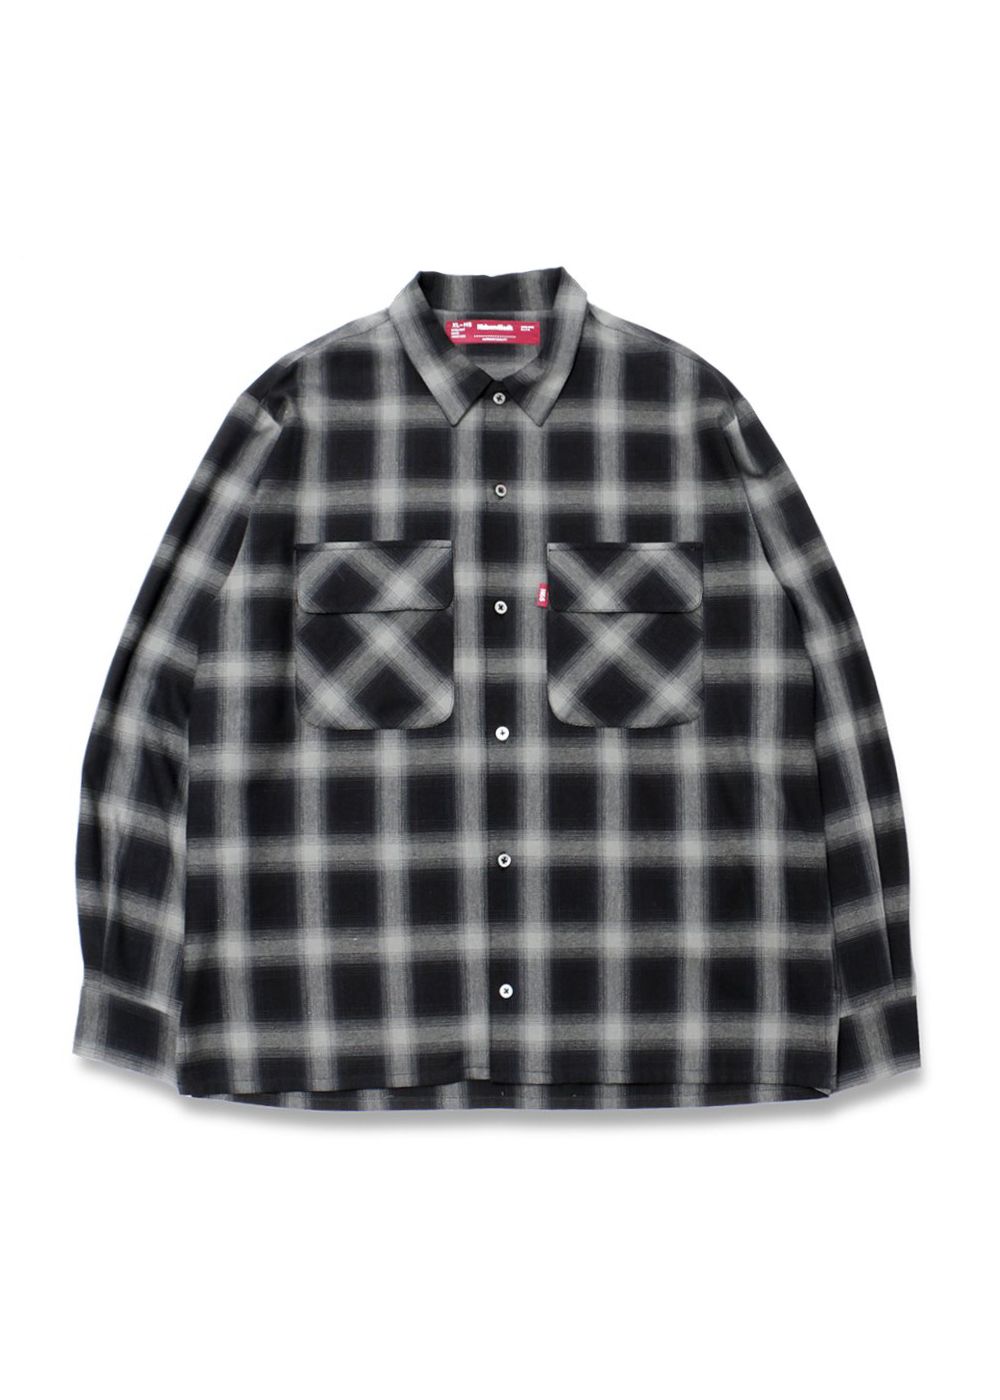 HIDE AND SEEK - OMBRE CHECK L/S SHIRT (GRAY) / オンブレチェック